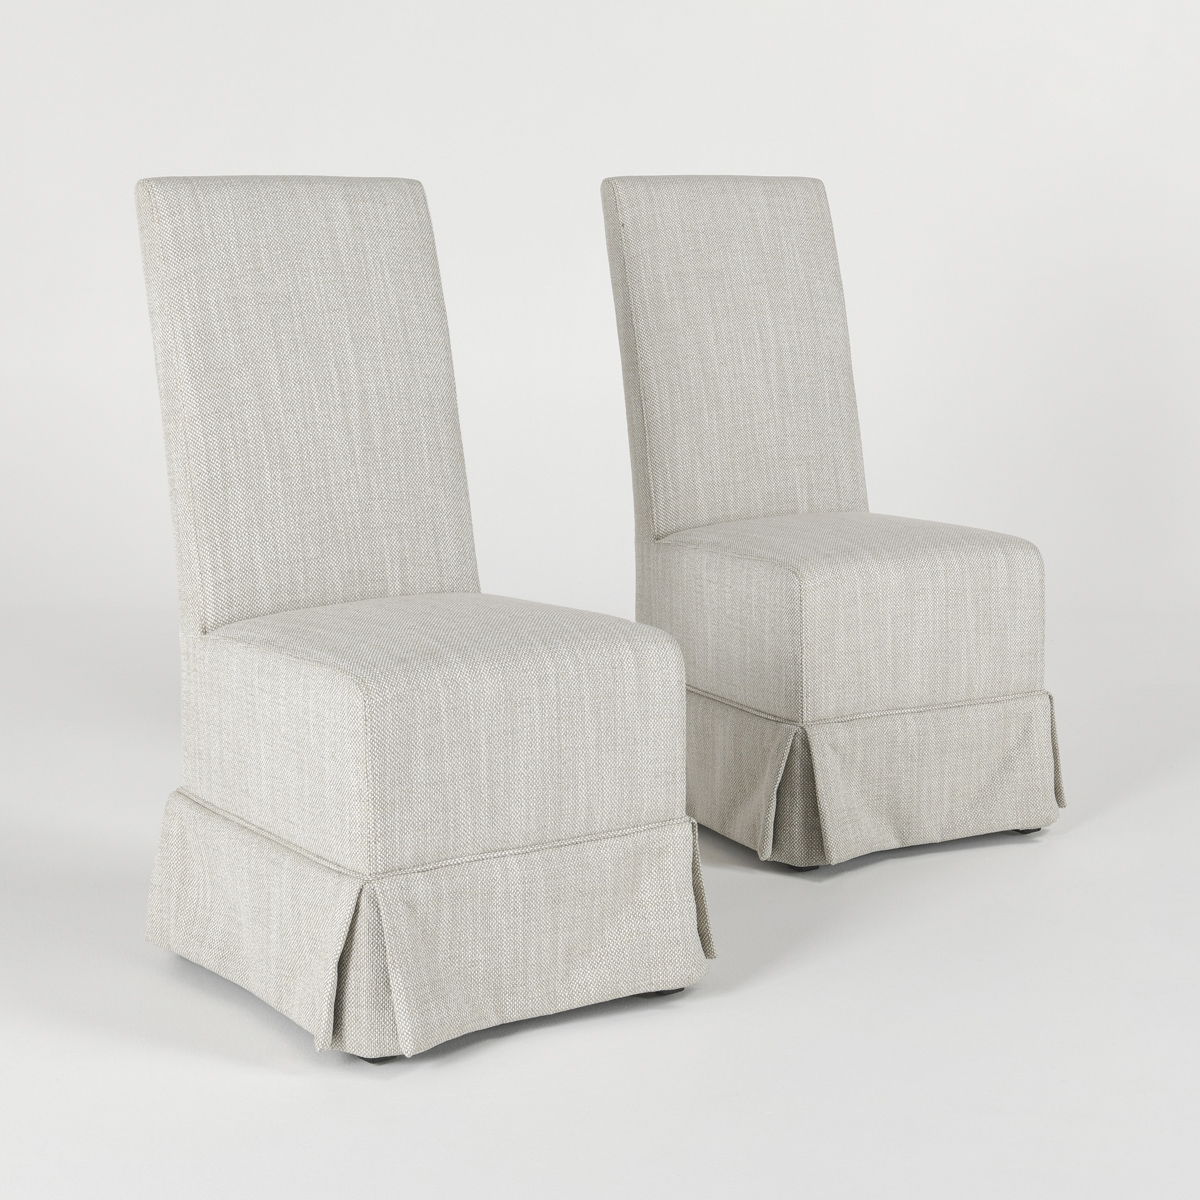 Melrose - Upholstered Dining Chair (Set of 2)